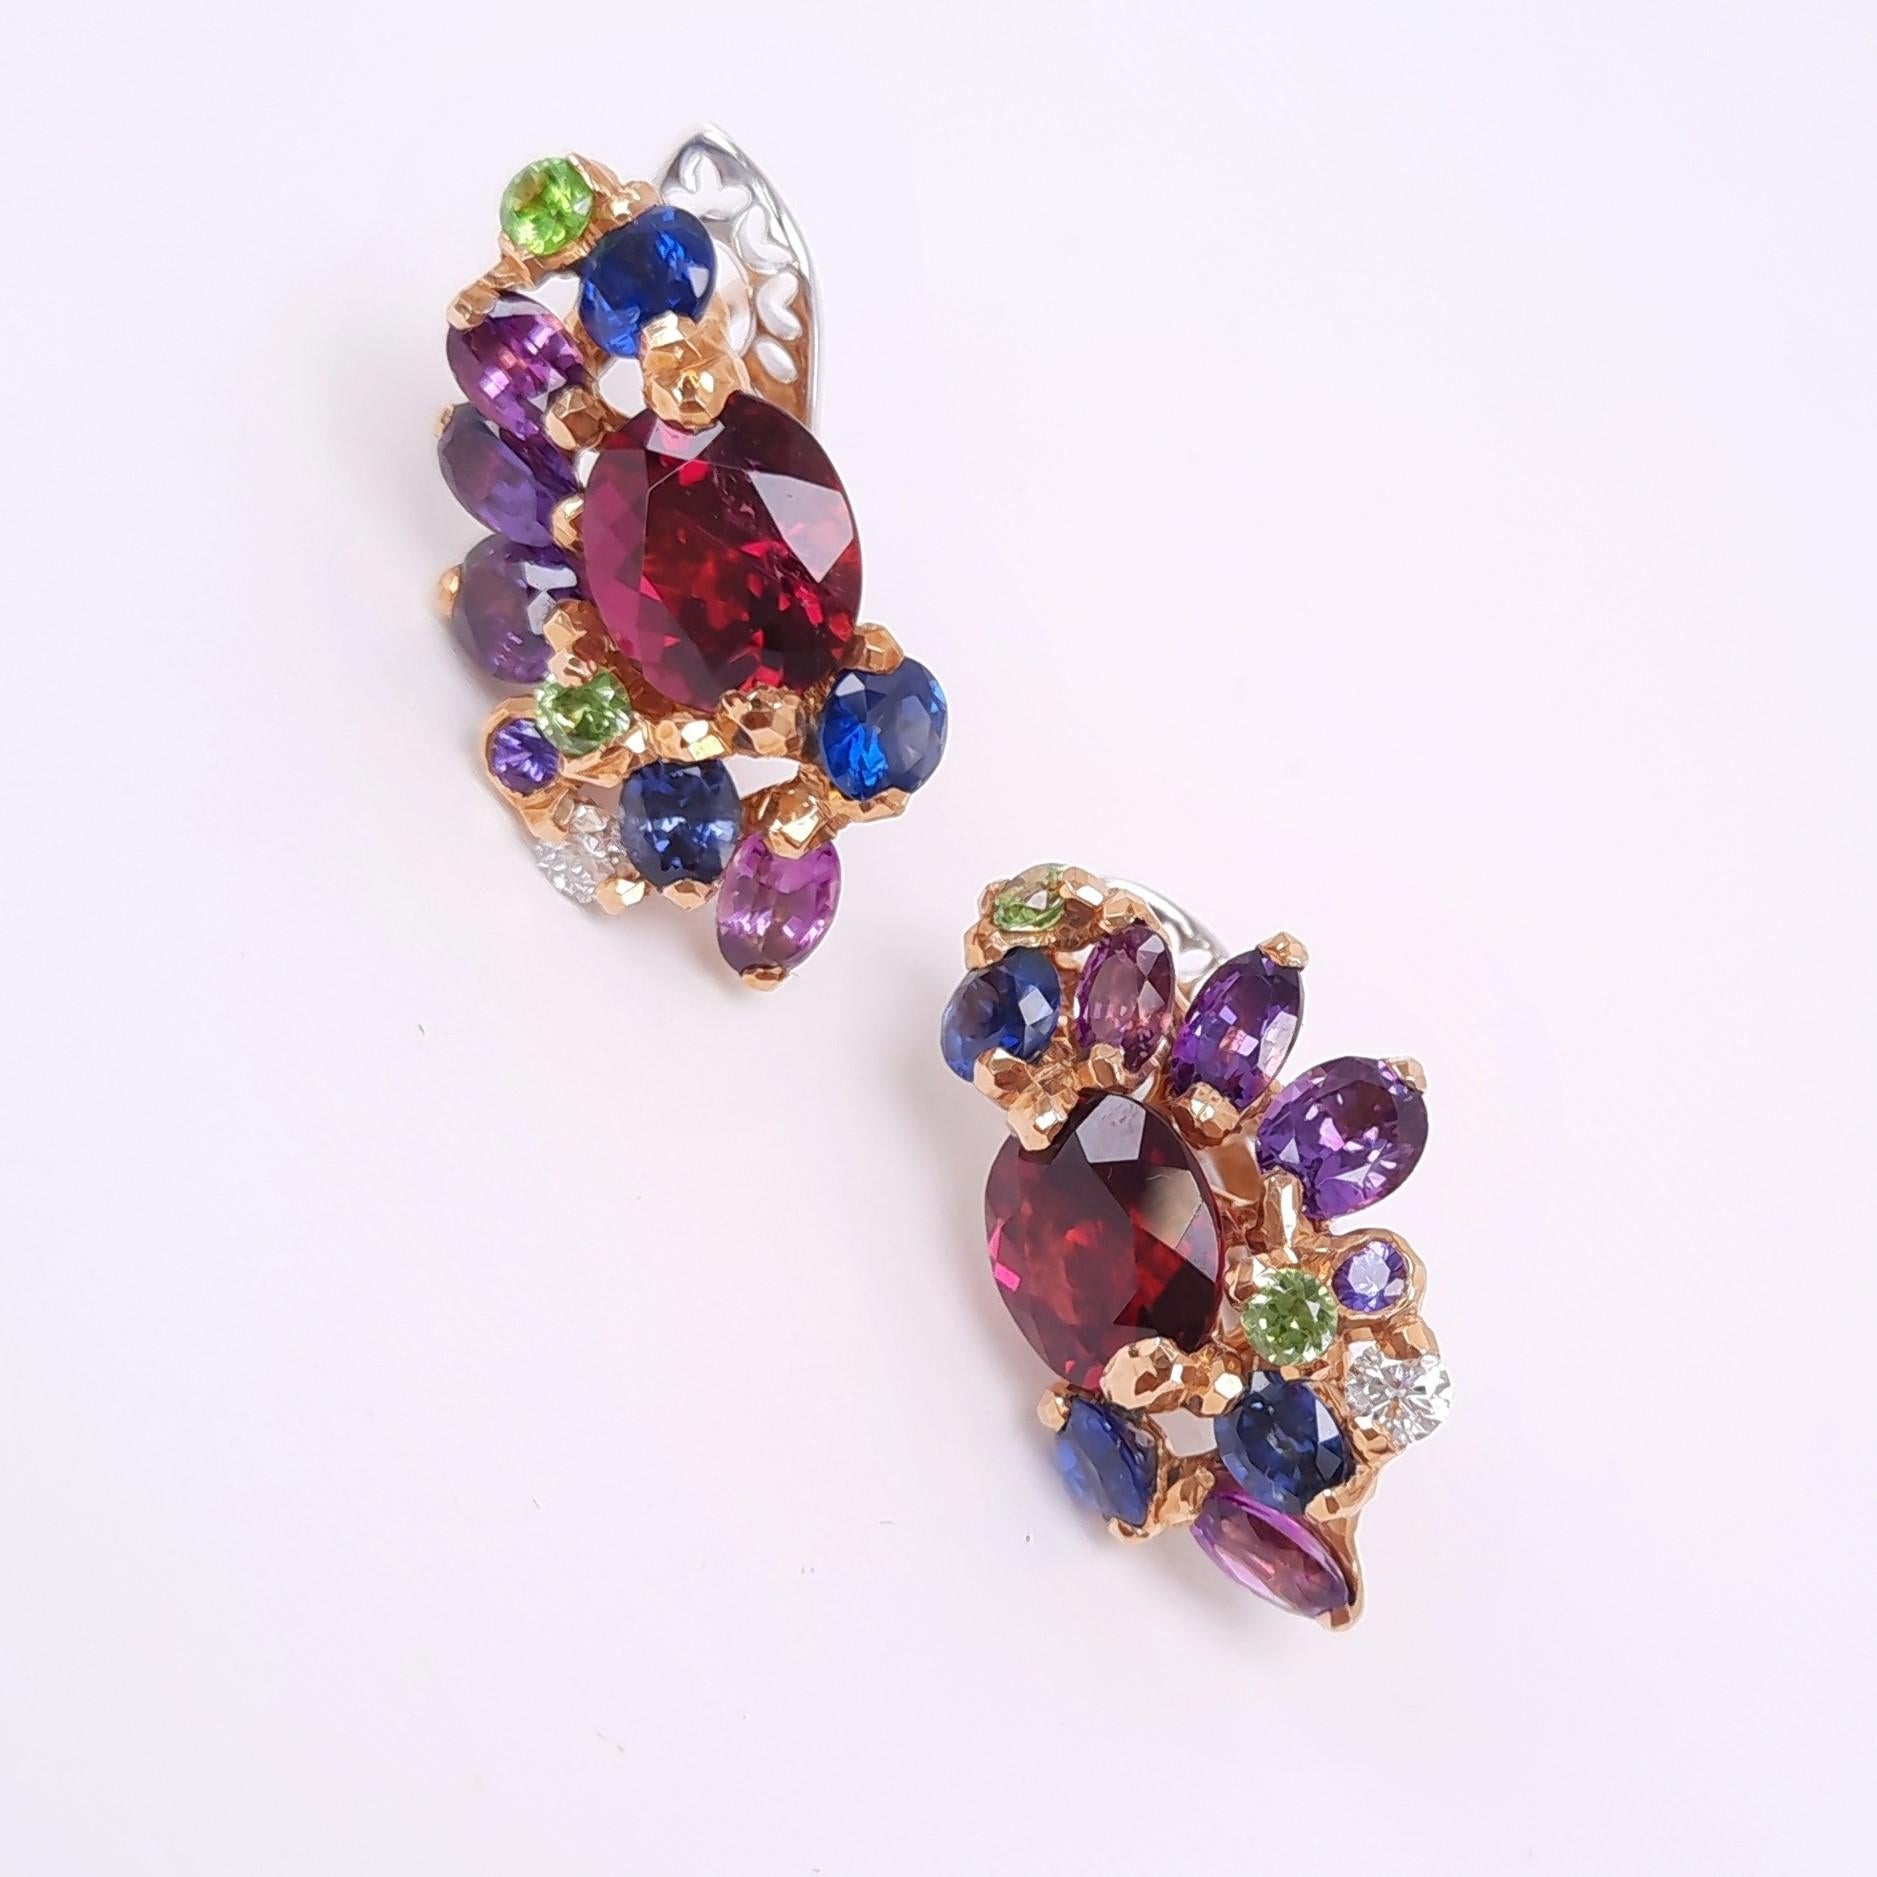 Handmade in 18K gold with artistry taste and the top quality gems, Viktor Moiseikin's intensive rubellite earings give the perfect colour harmony, creating a breathtaking masterpiece that transcends time and trends.

At the heart of these earrings